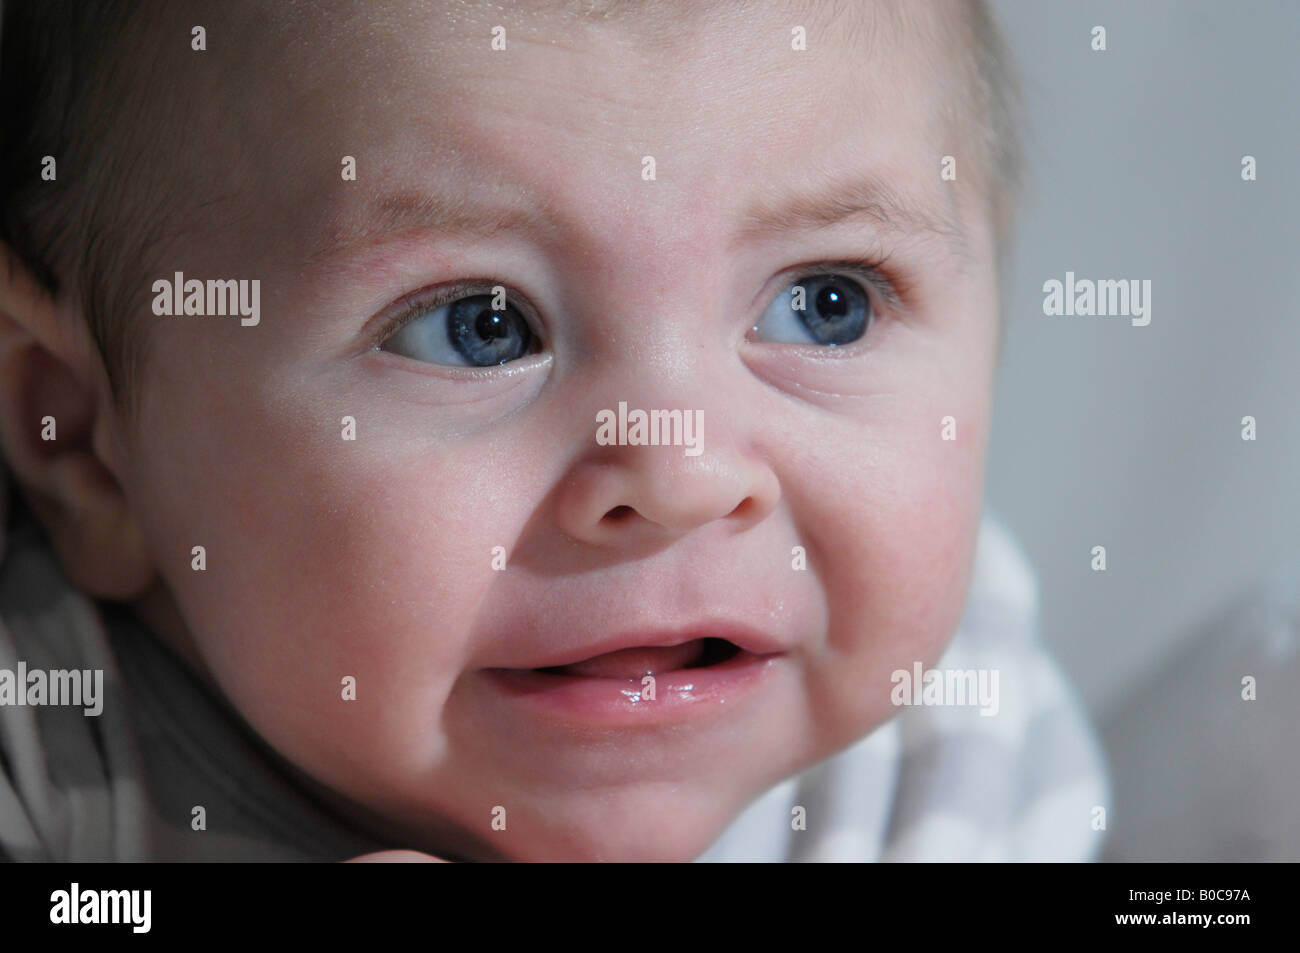 crying angry mad 3 month old caucasian baby boy Stock Photo - Alamy